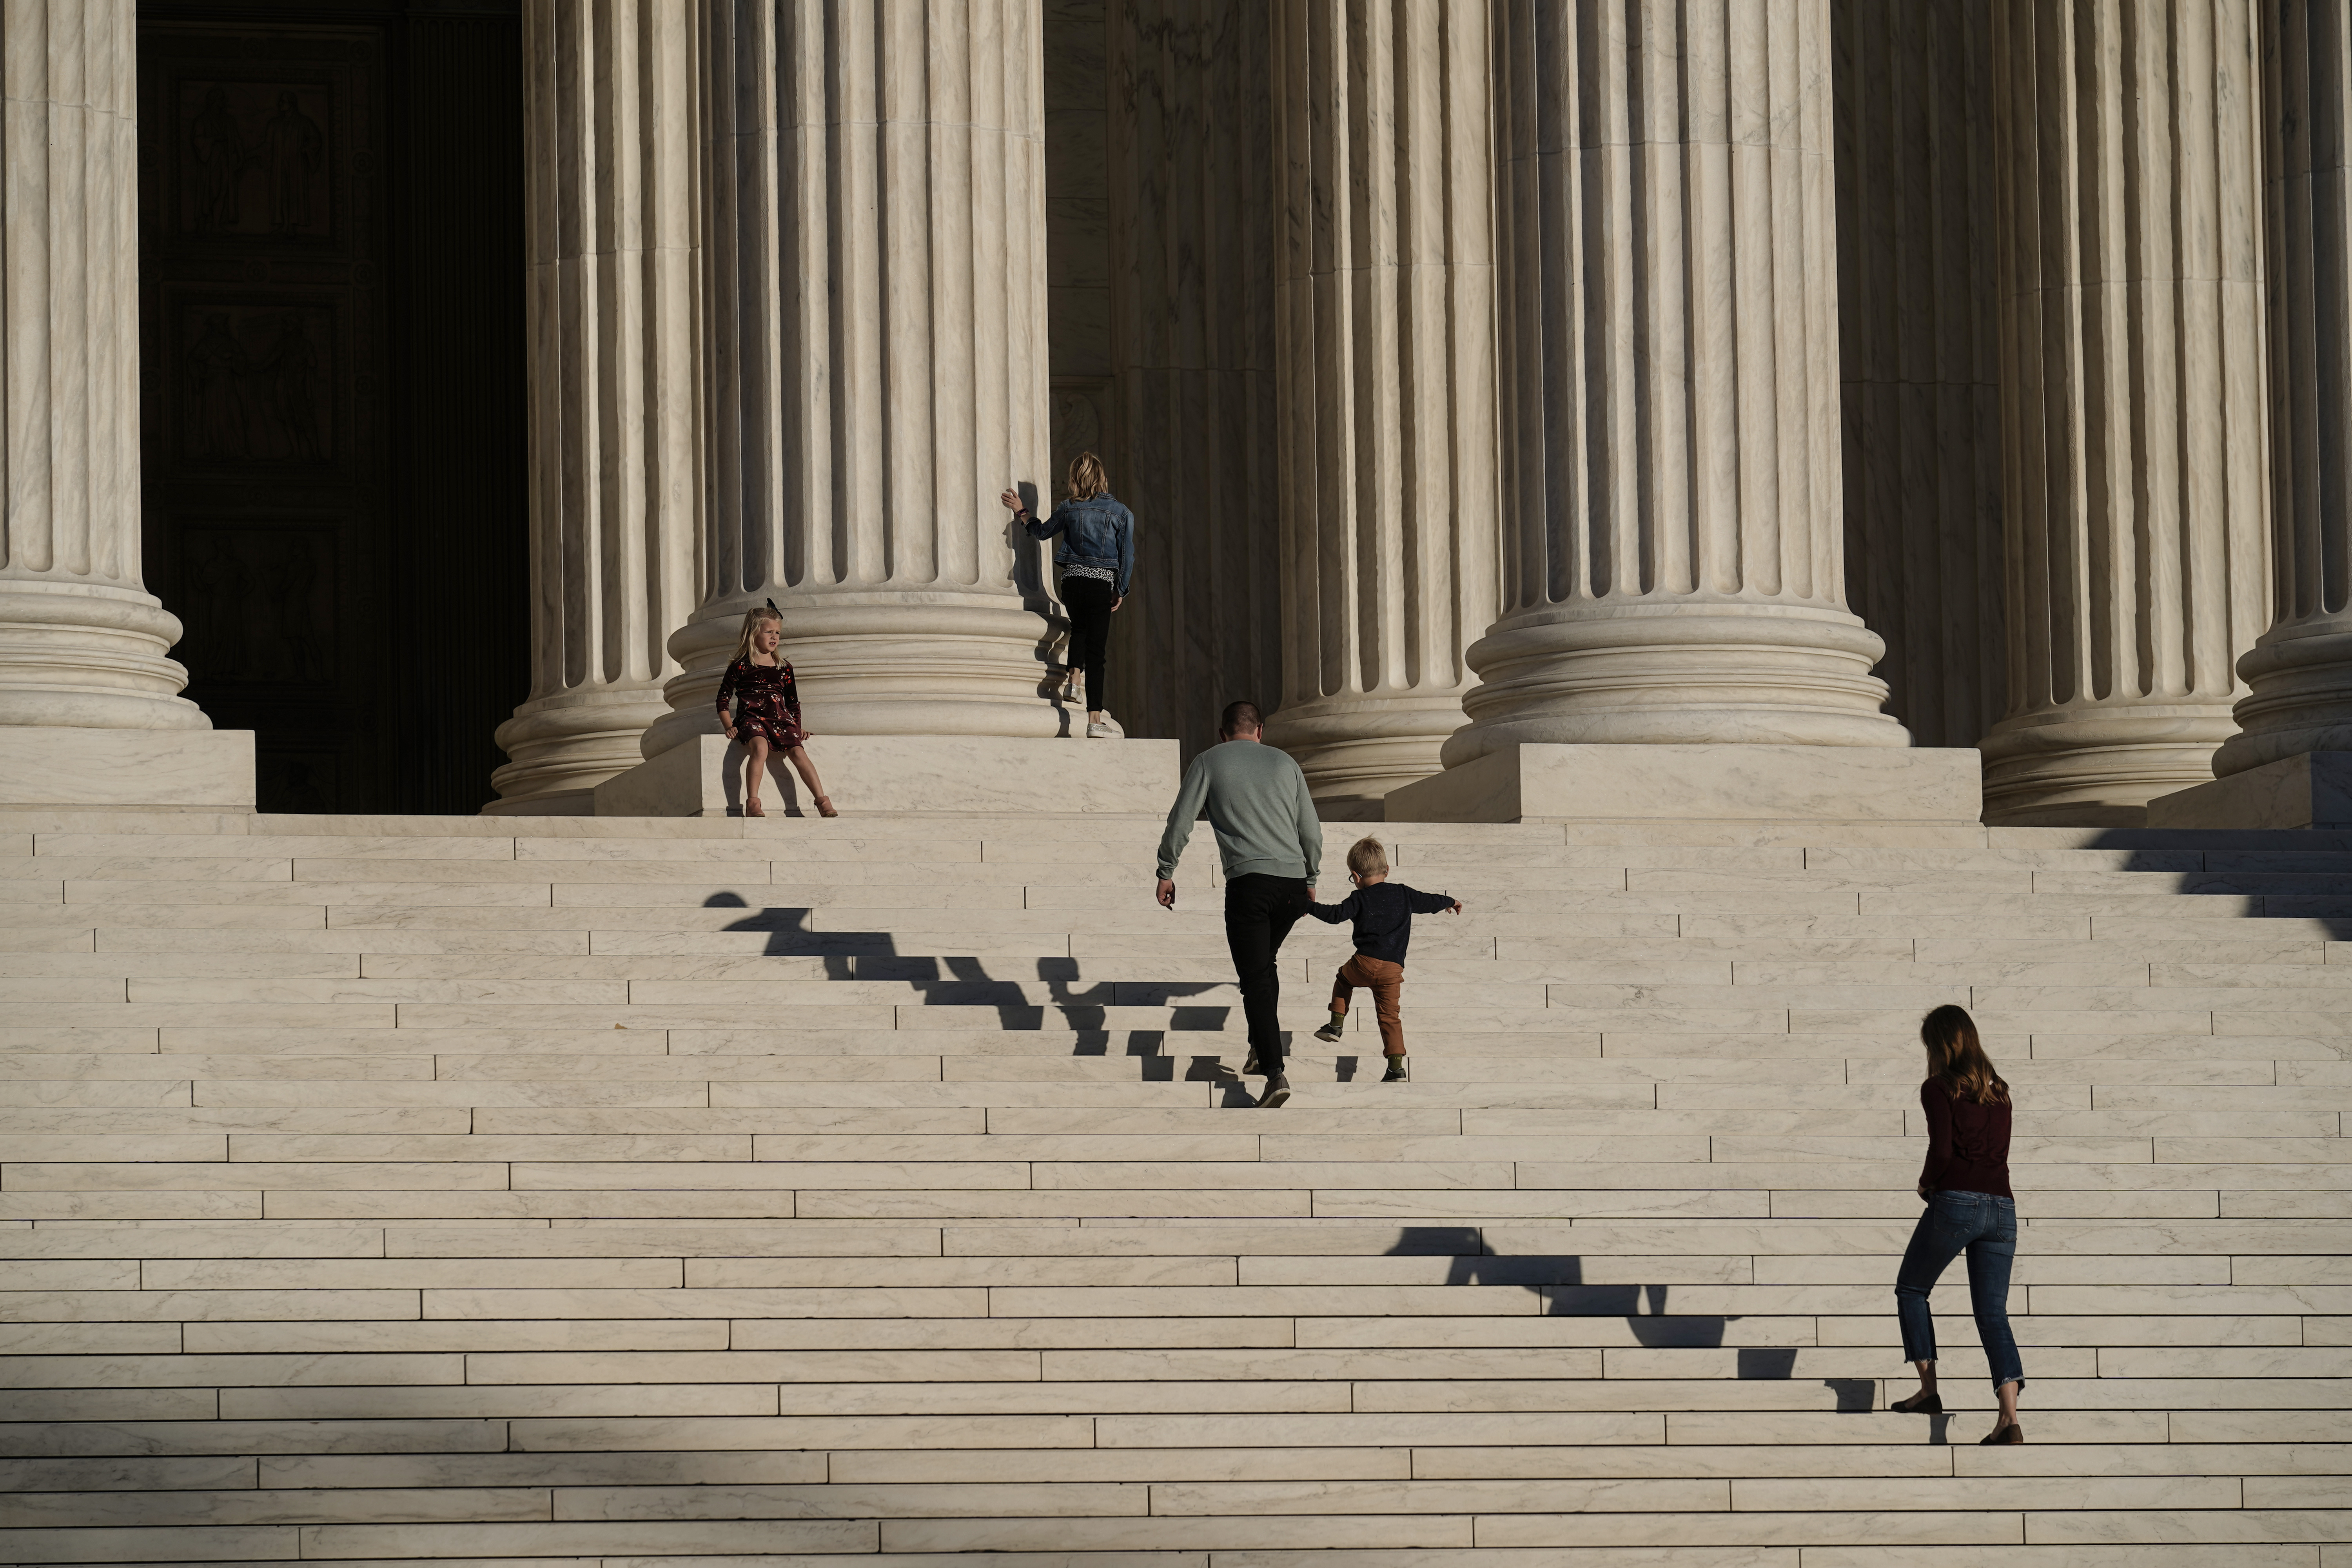 A family visits the Supreme Court in Washington, Wednesday, Nov. 4, 2020. The Trump campaign is seeking to intervene in a Pennsylvania case at the Supreme Court that deals with whether ballots received up to three days after the election can be counted. Photo: AP